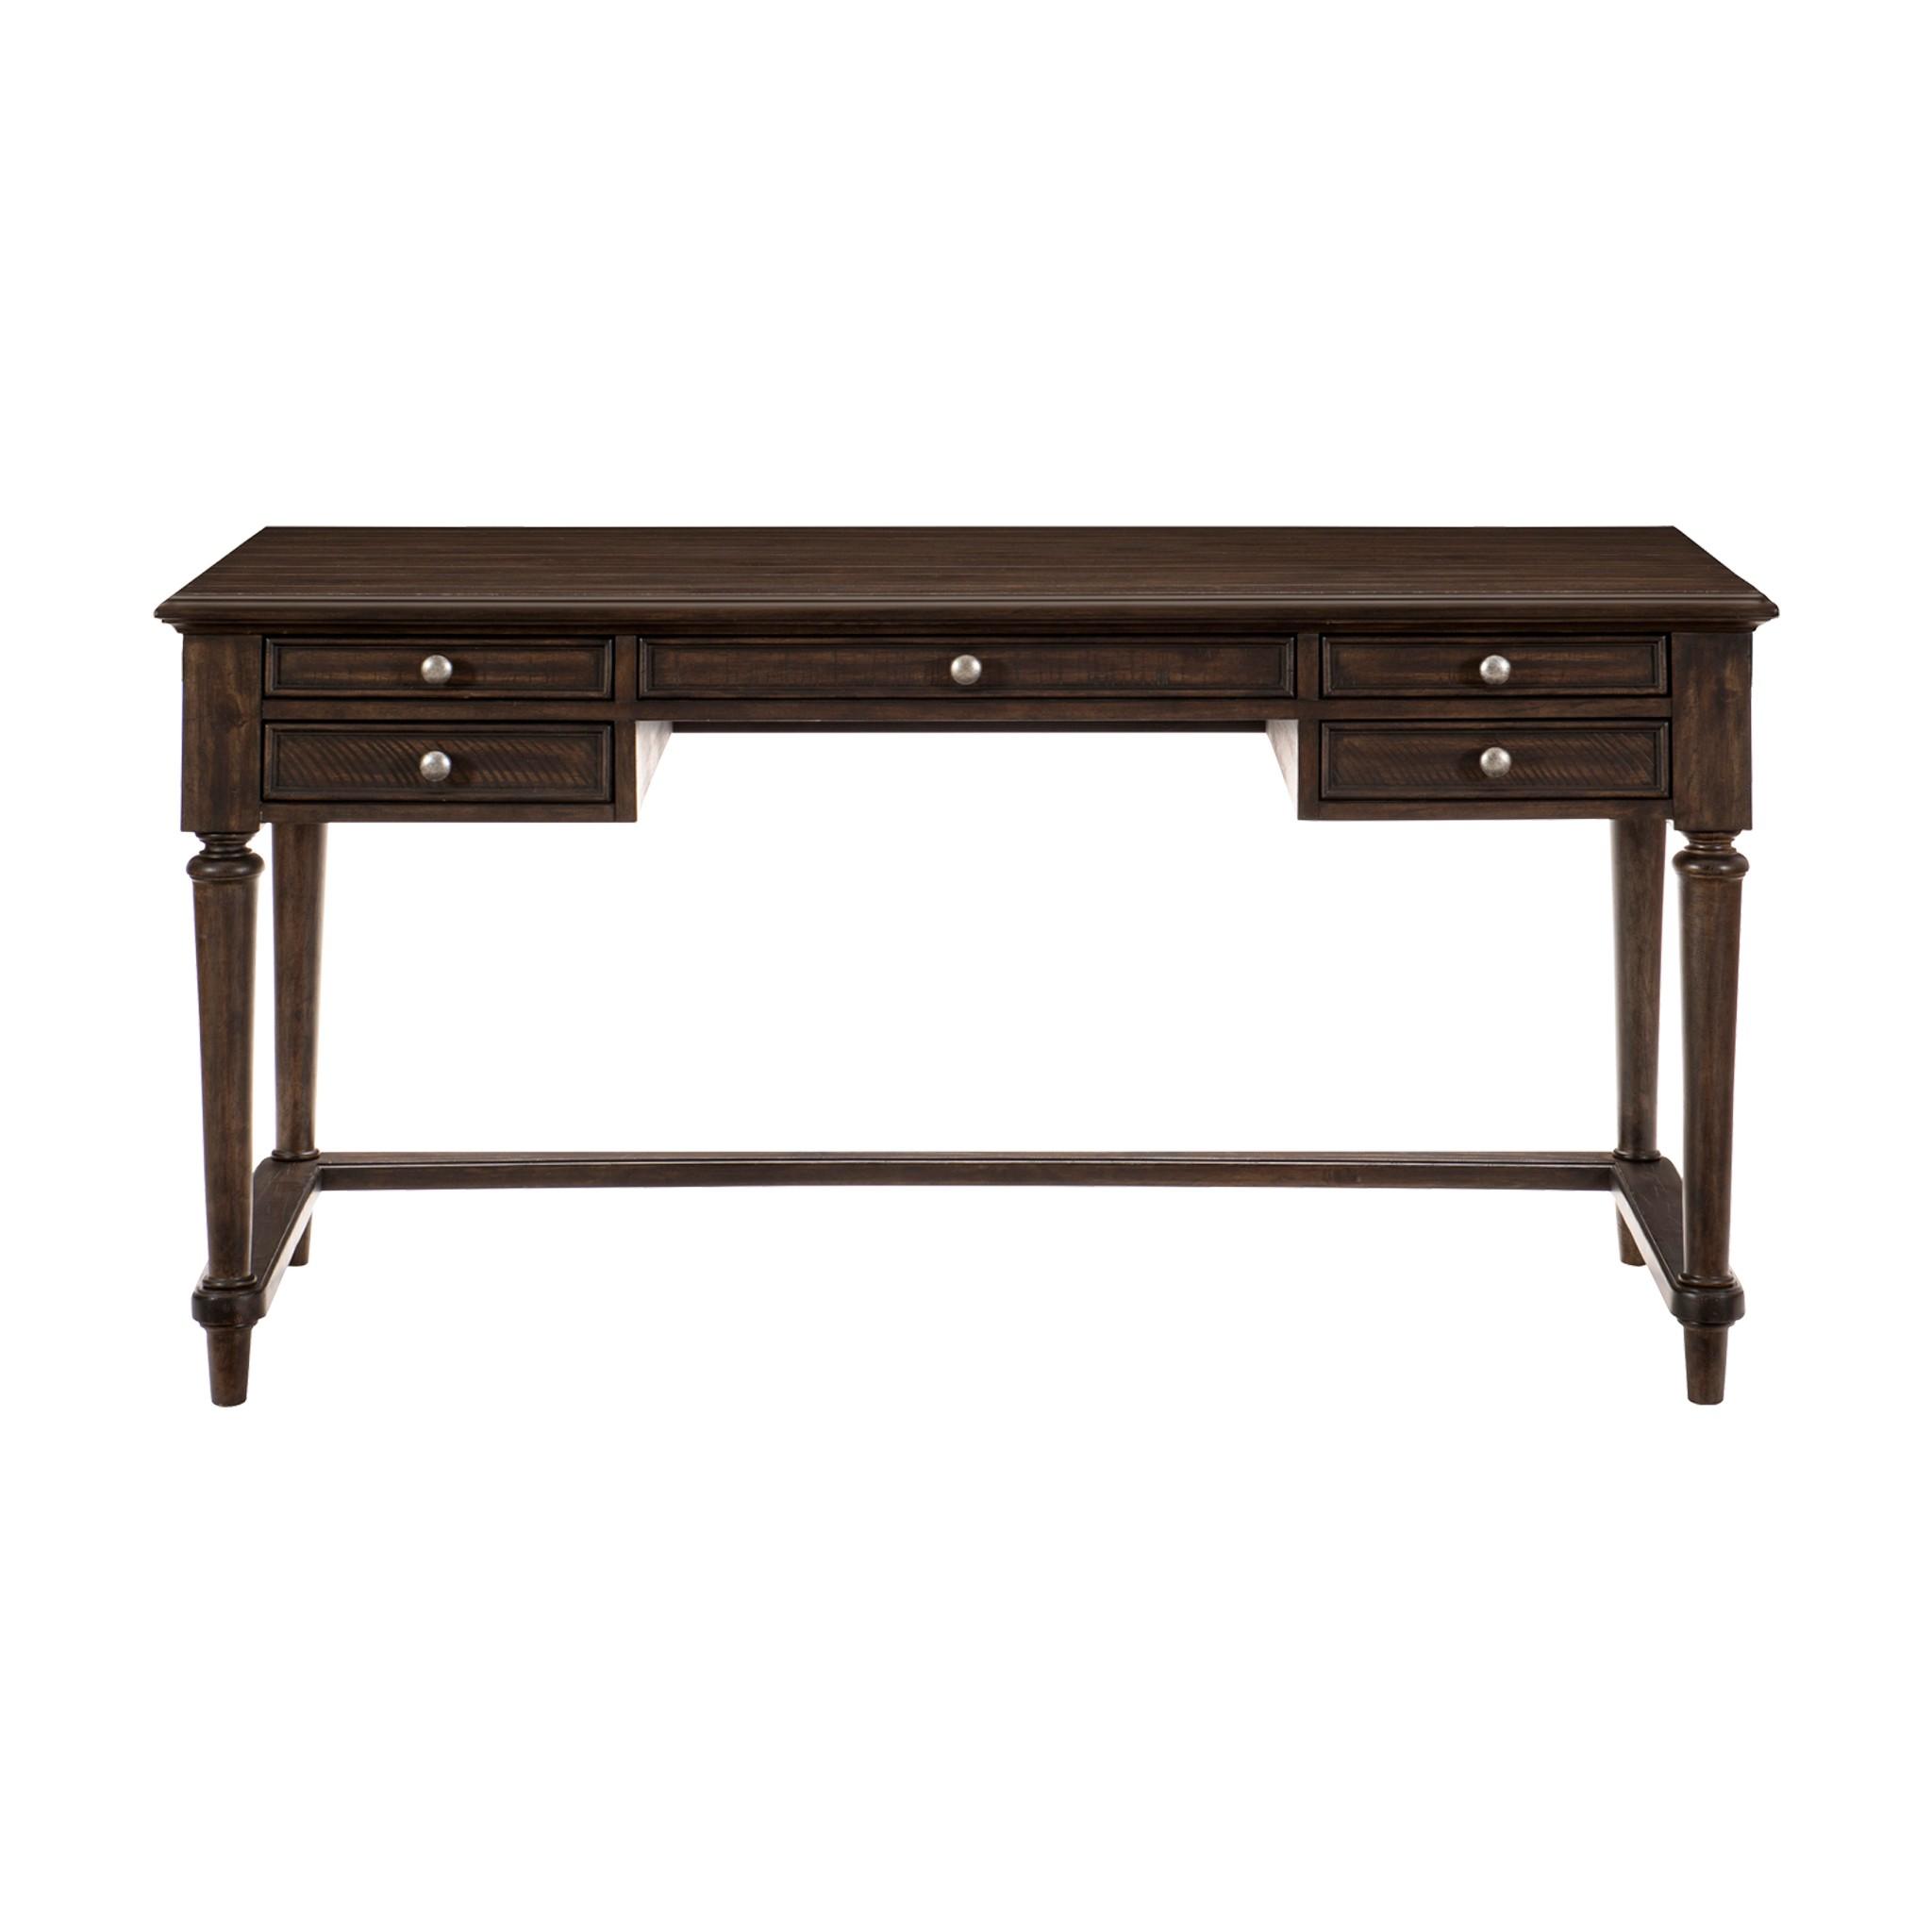 Transitional Writing Desk 1689-16 Cardano 1689-16 in Charcoal 